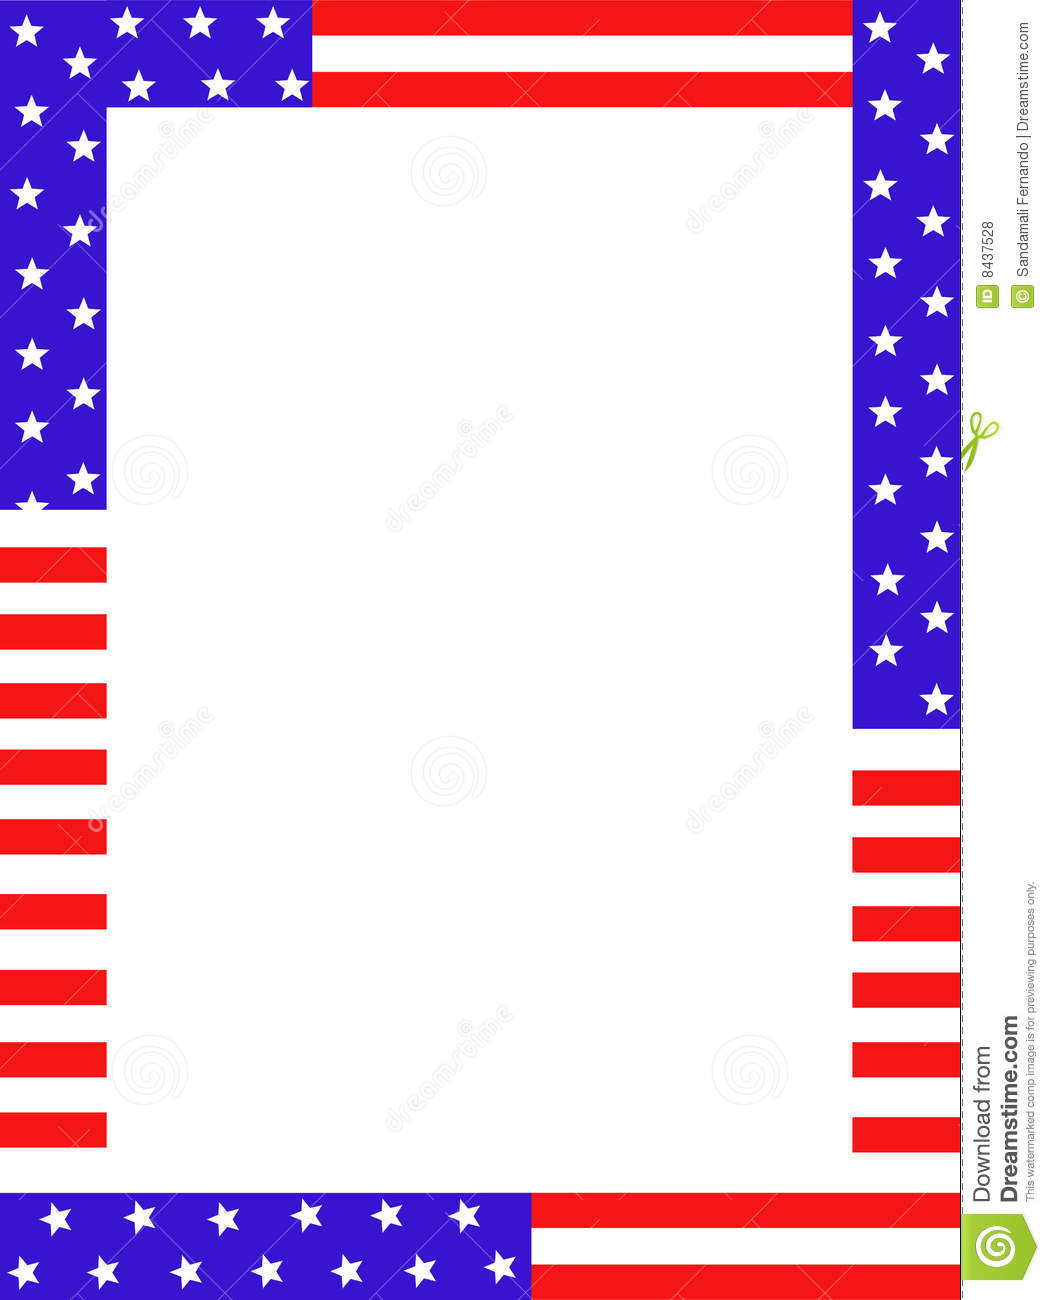 Blue And Red Patriotic Stars And Stripes Page Border   Frame Design 